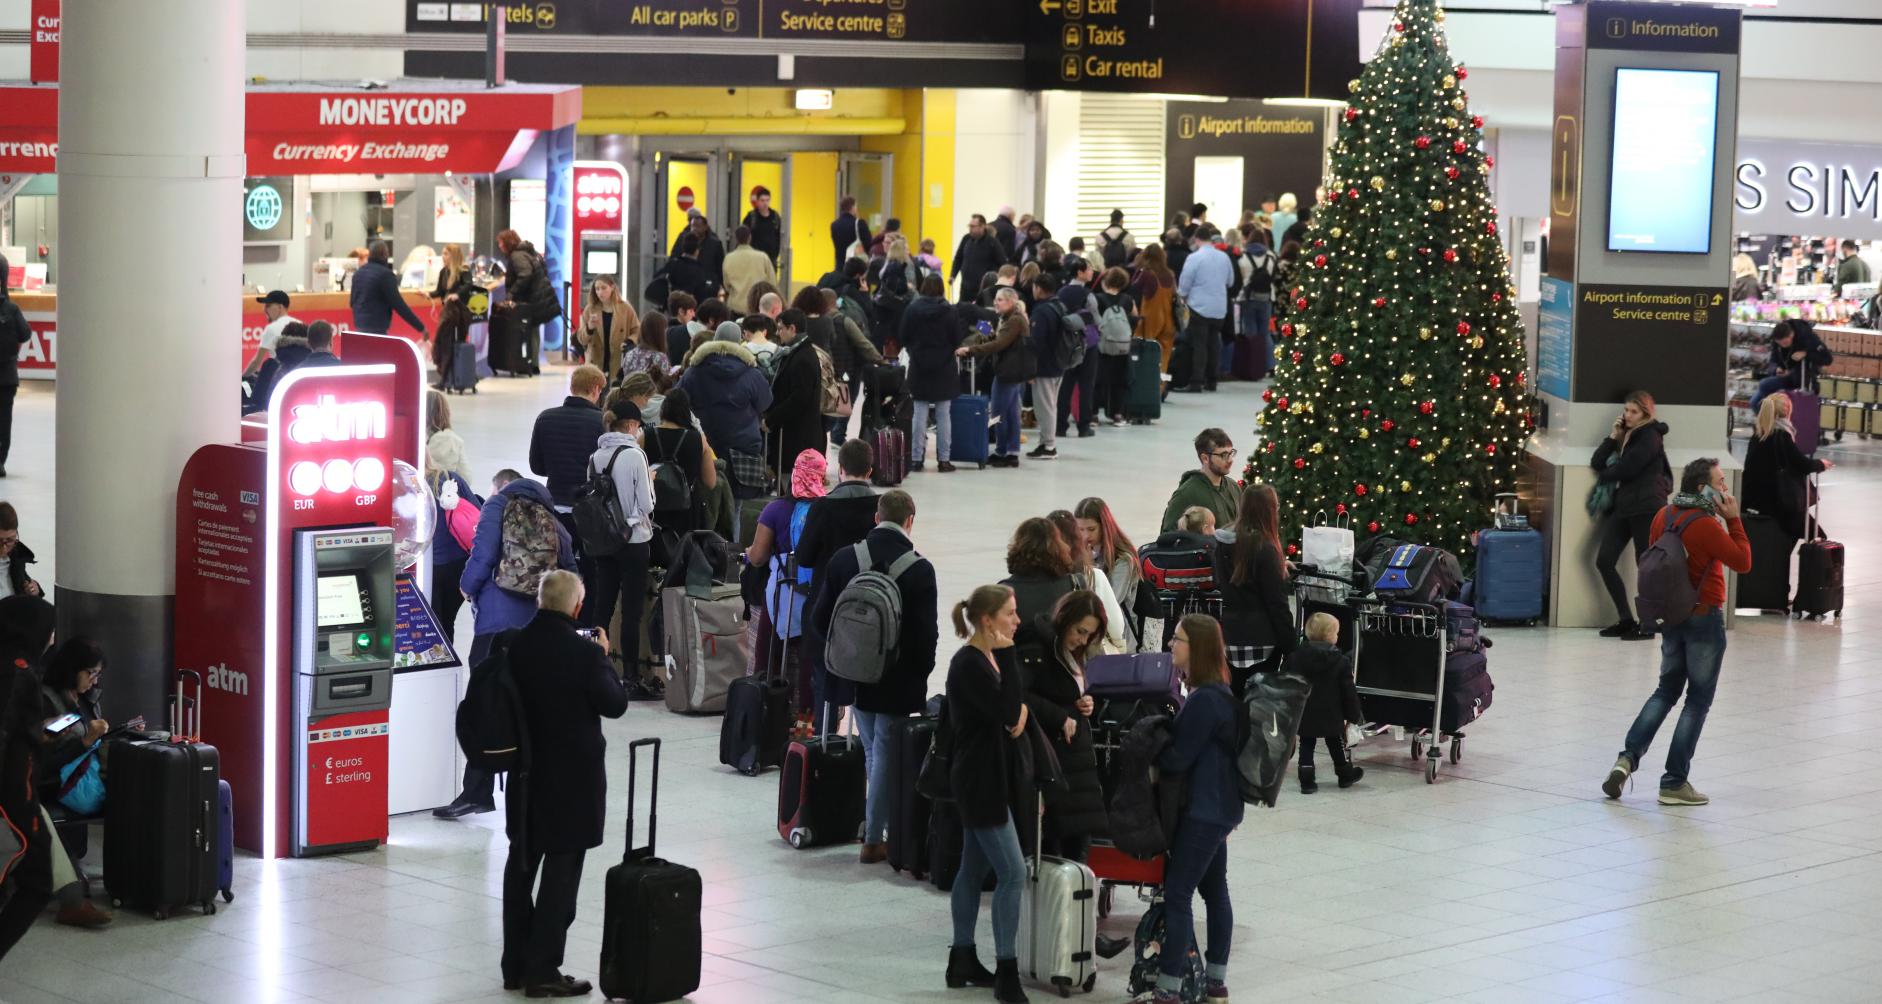 long line at airport during the holidays, Six-month Clear Membership as a gift idea